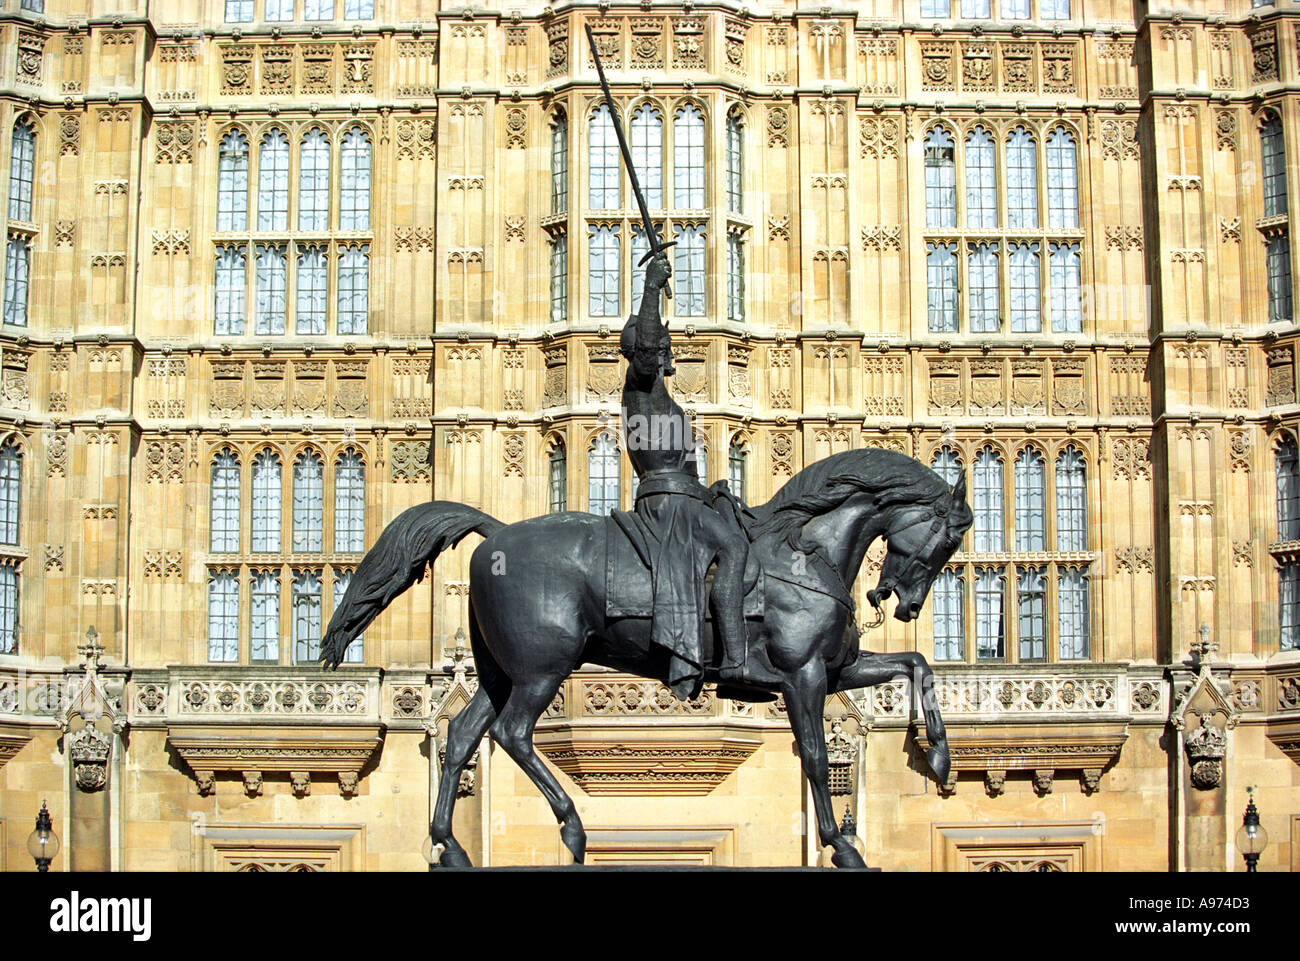 King Richard the Lionheart statue outside The Houses of Parliament in London England UK Stock Photo